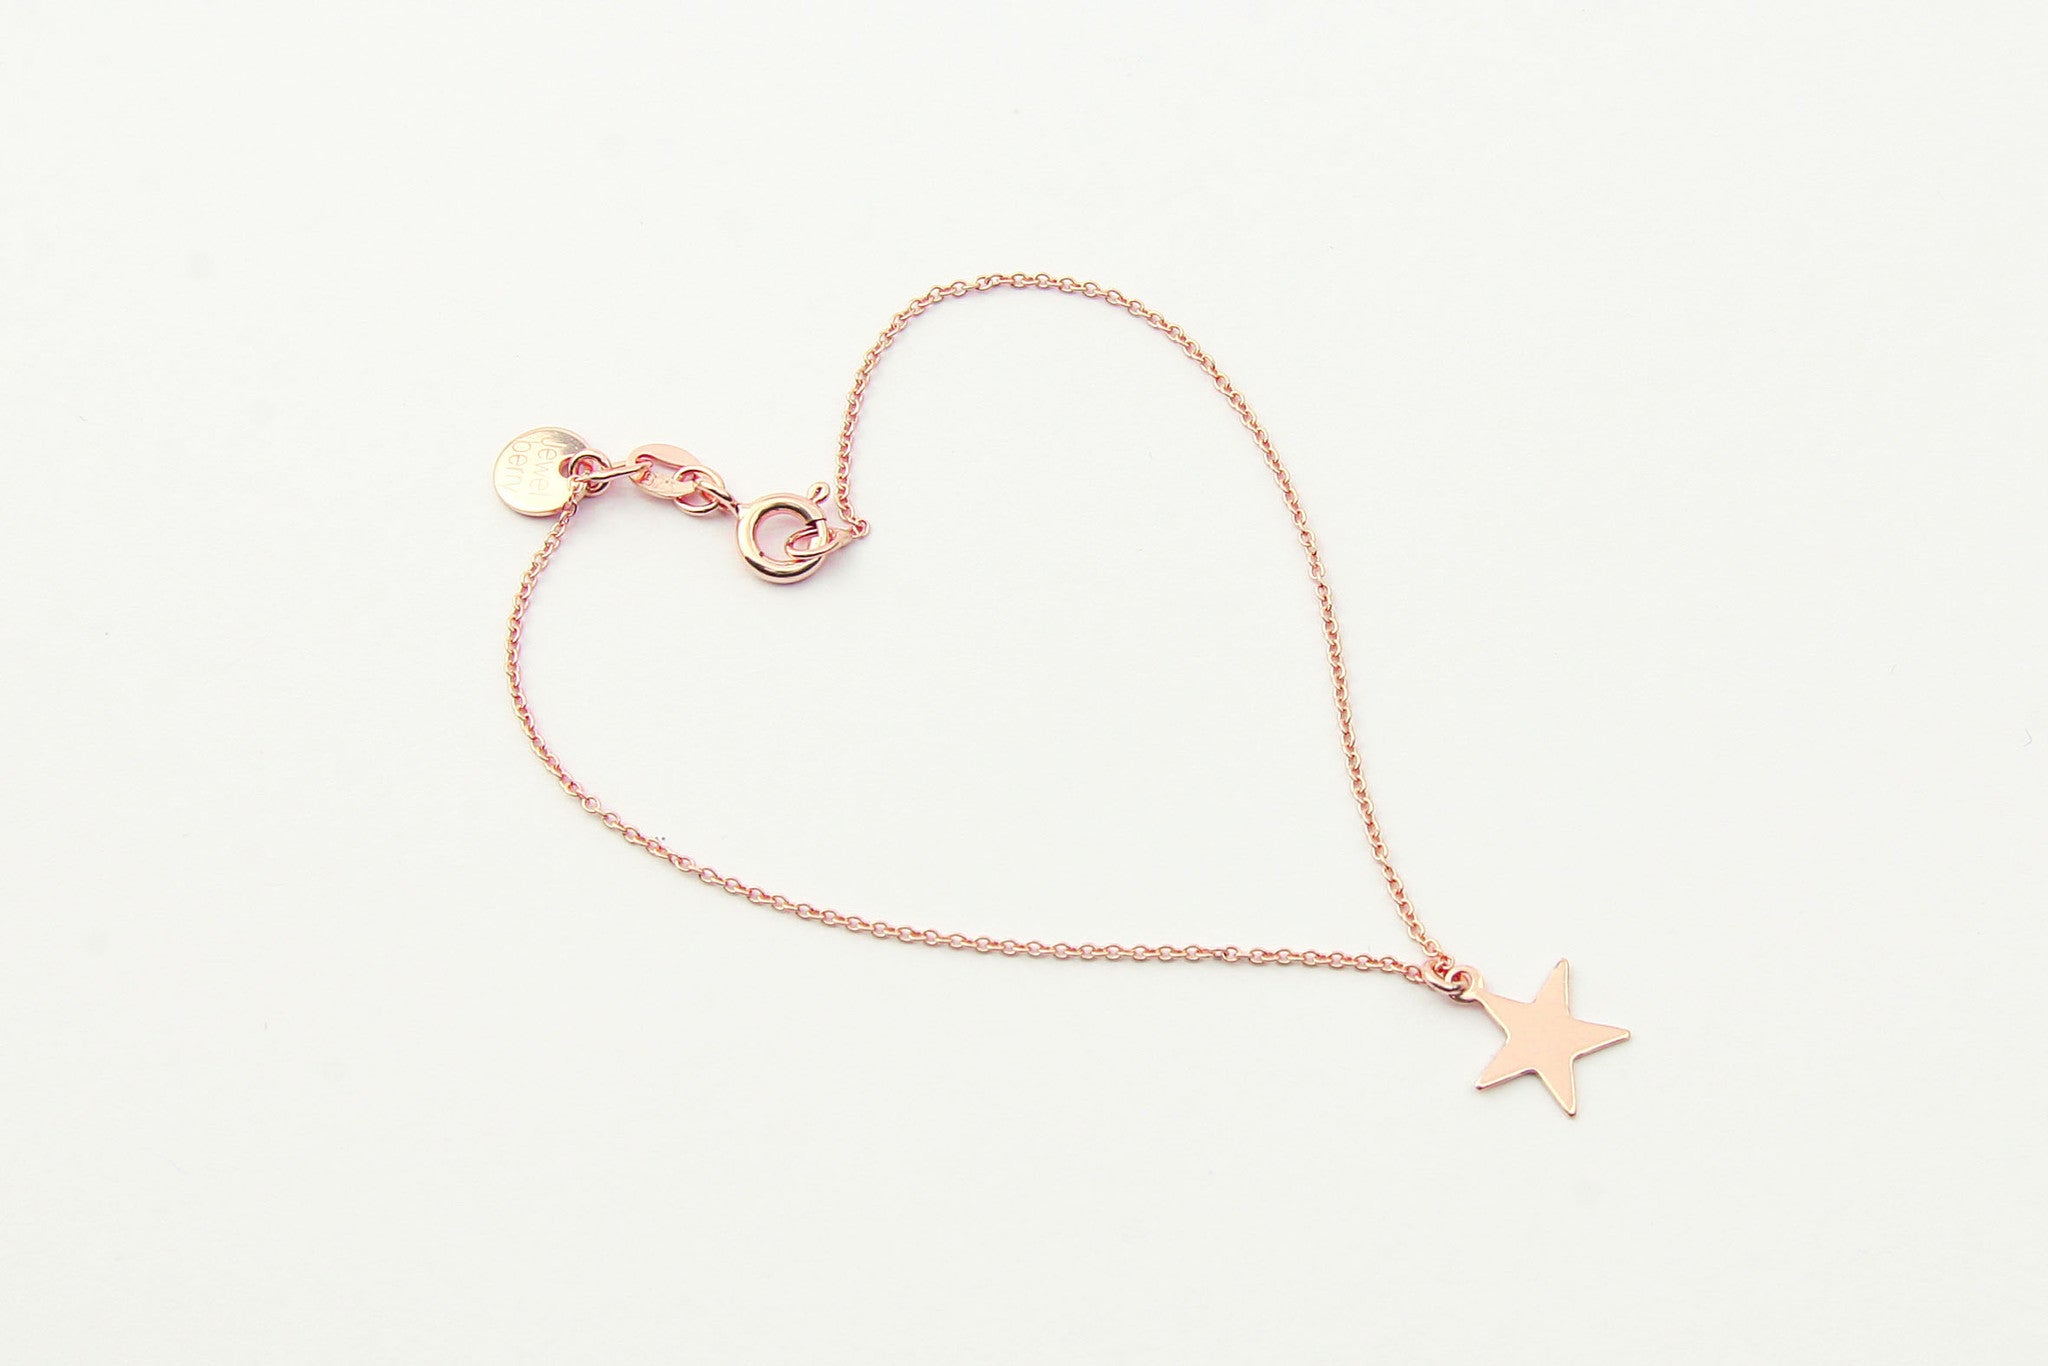 jewelberry armband bracelet plain star rose gold plated sterling silver fine jewelry handmade with love fairtrade anchor chain